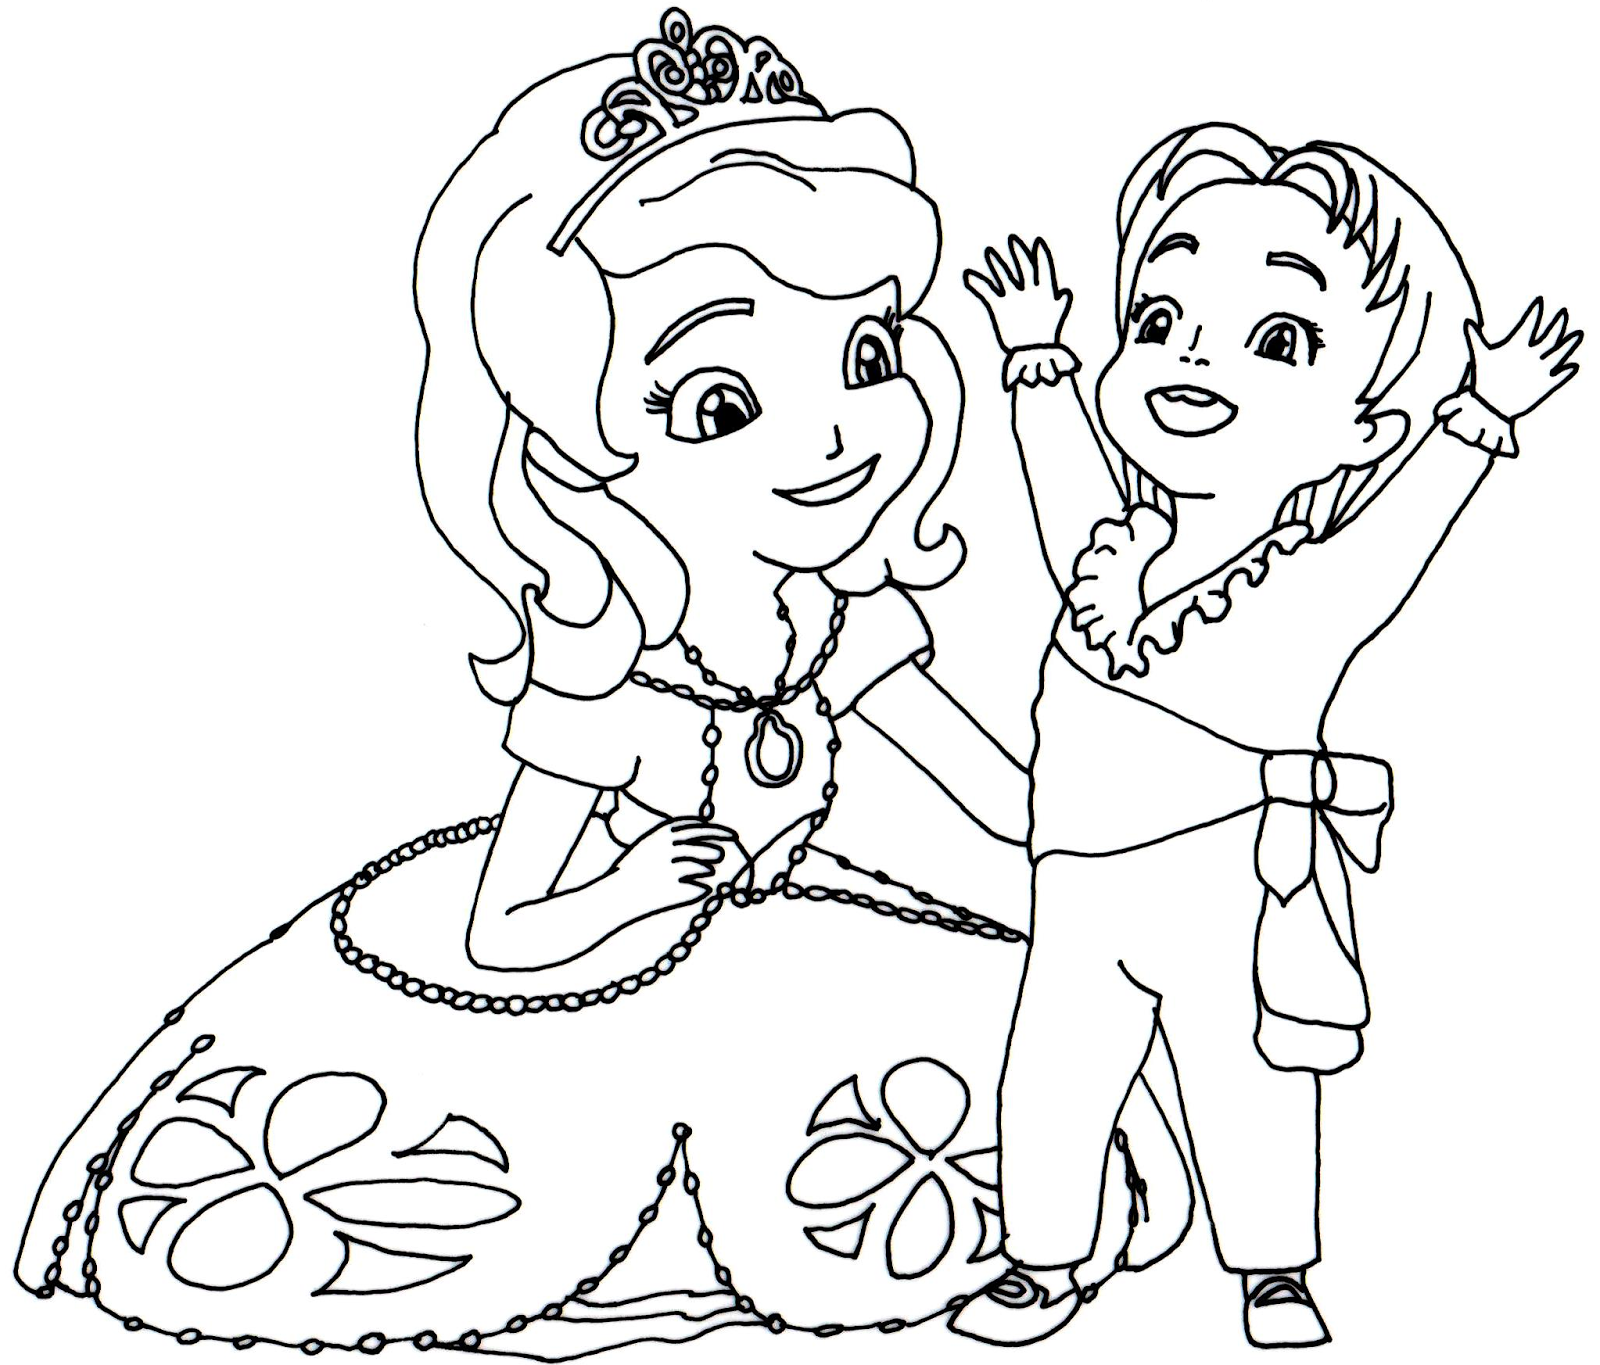 Download Sofia The First Coloring Pages: April 2014